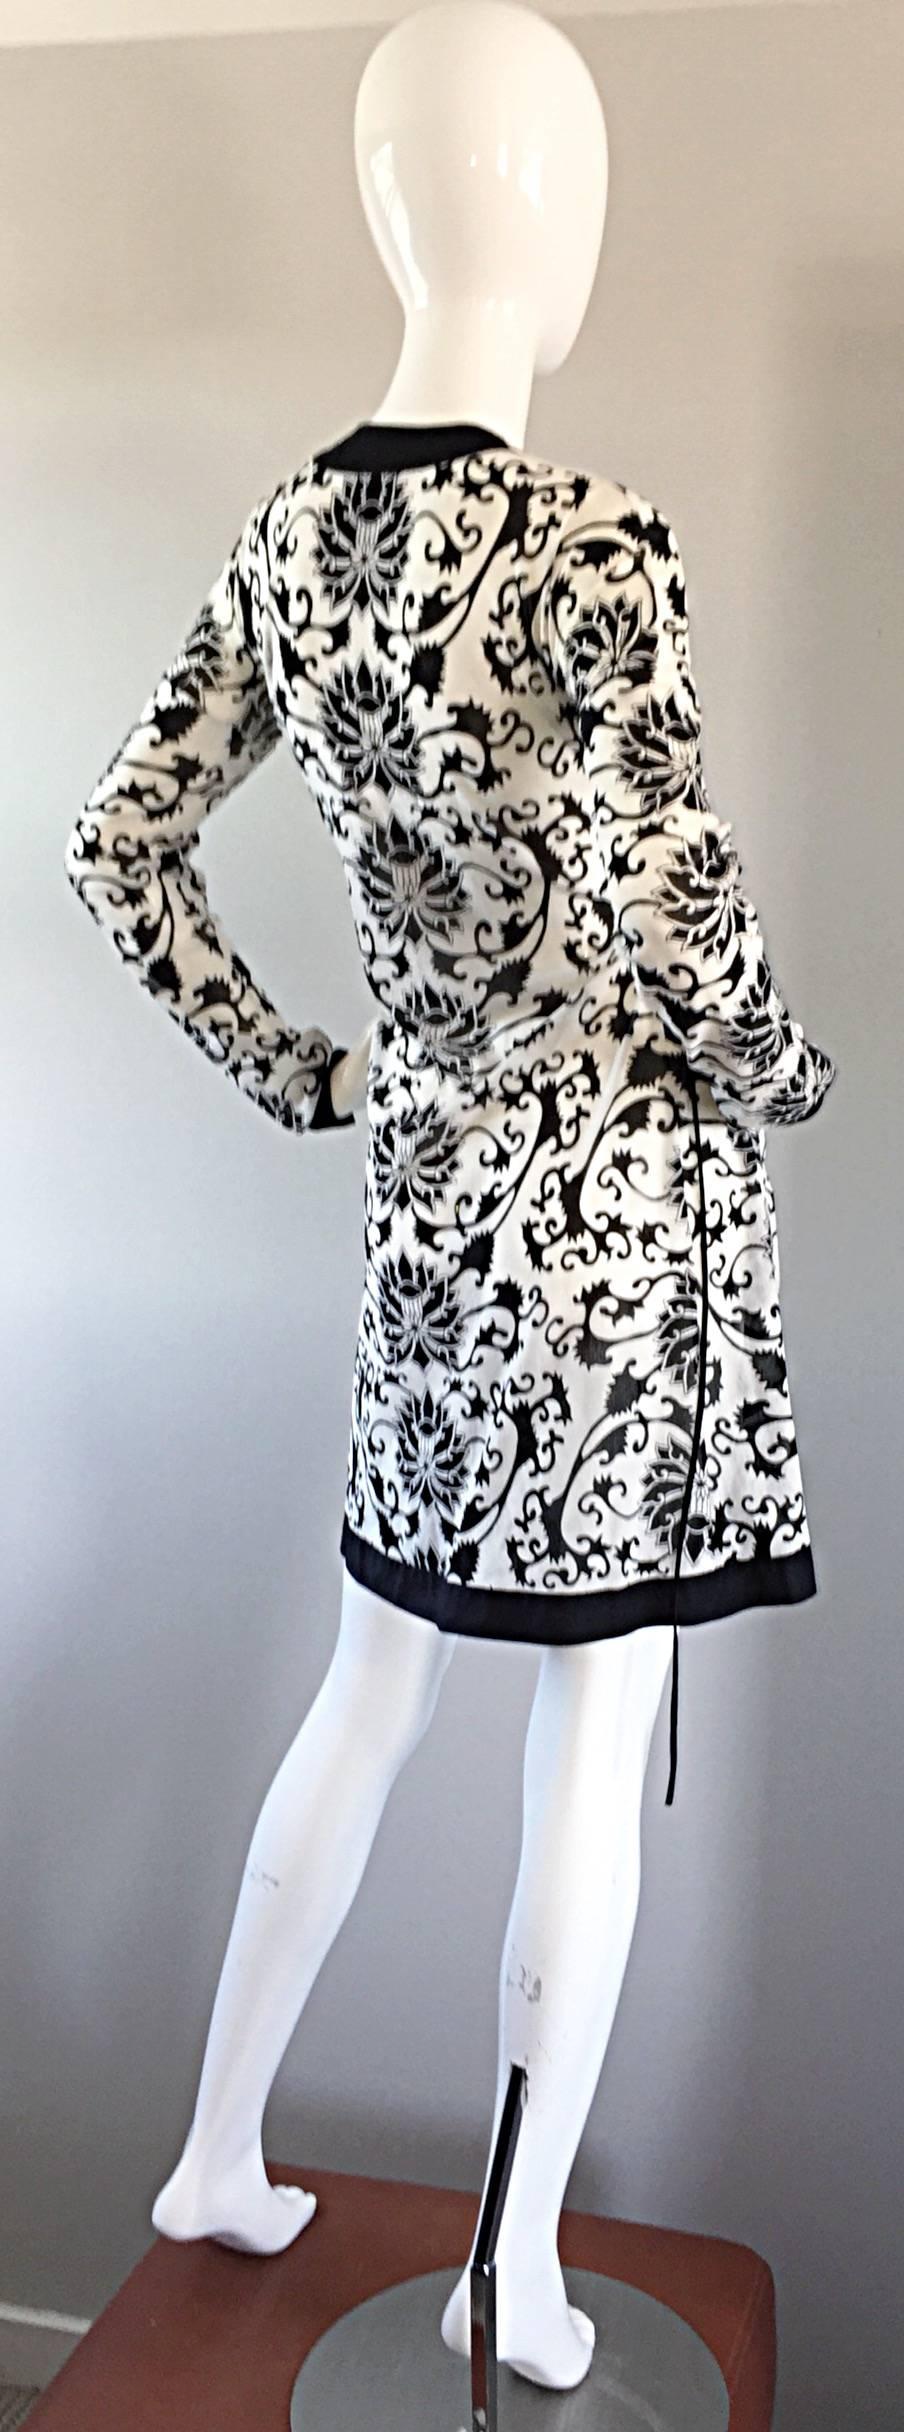 Rare Vintage Vivienne Tam Black and White Tattoo Print Asian Inspired Wrap Dress In Excellent Condition For Sale In San Diego, CA